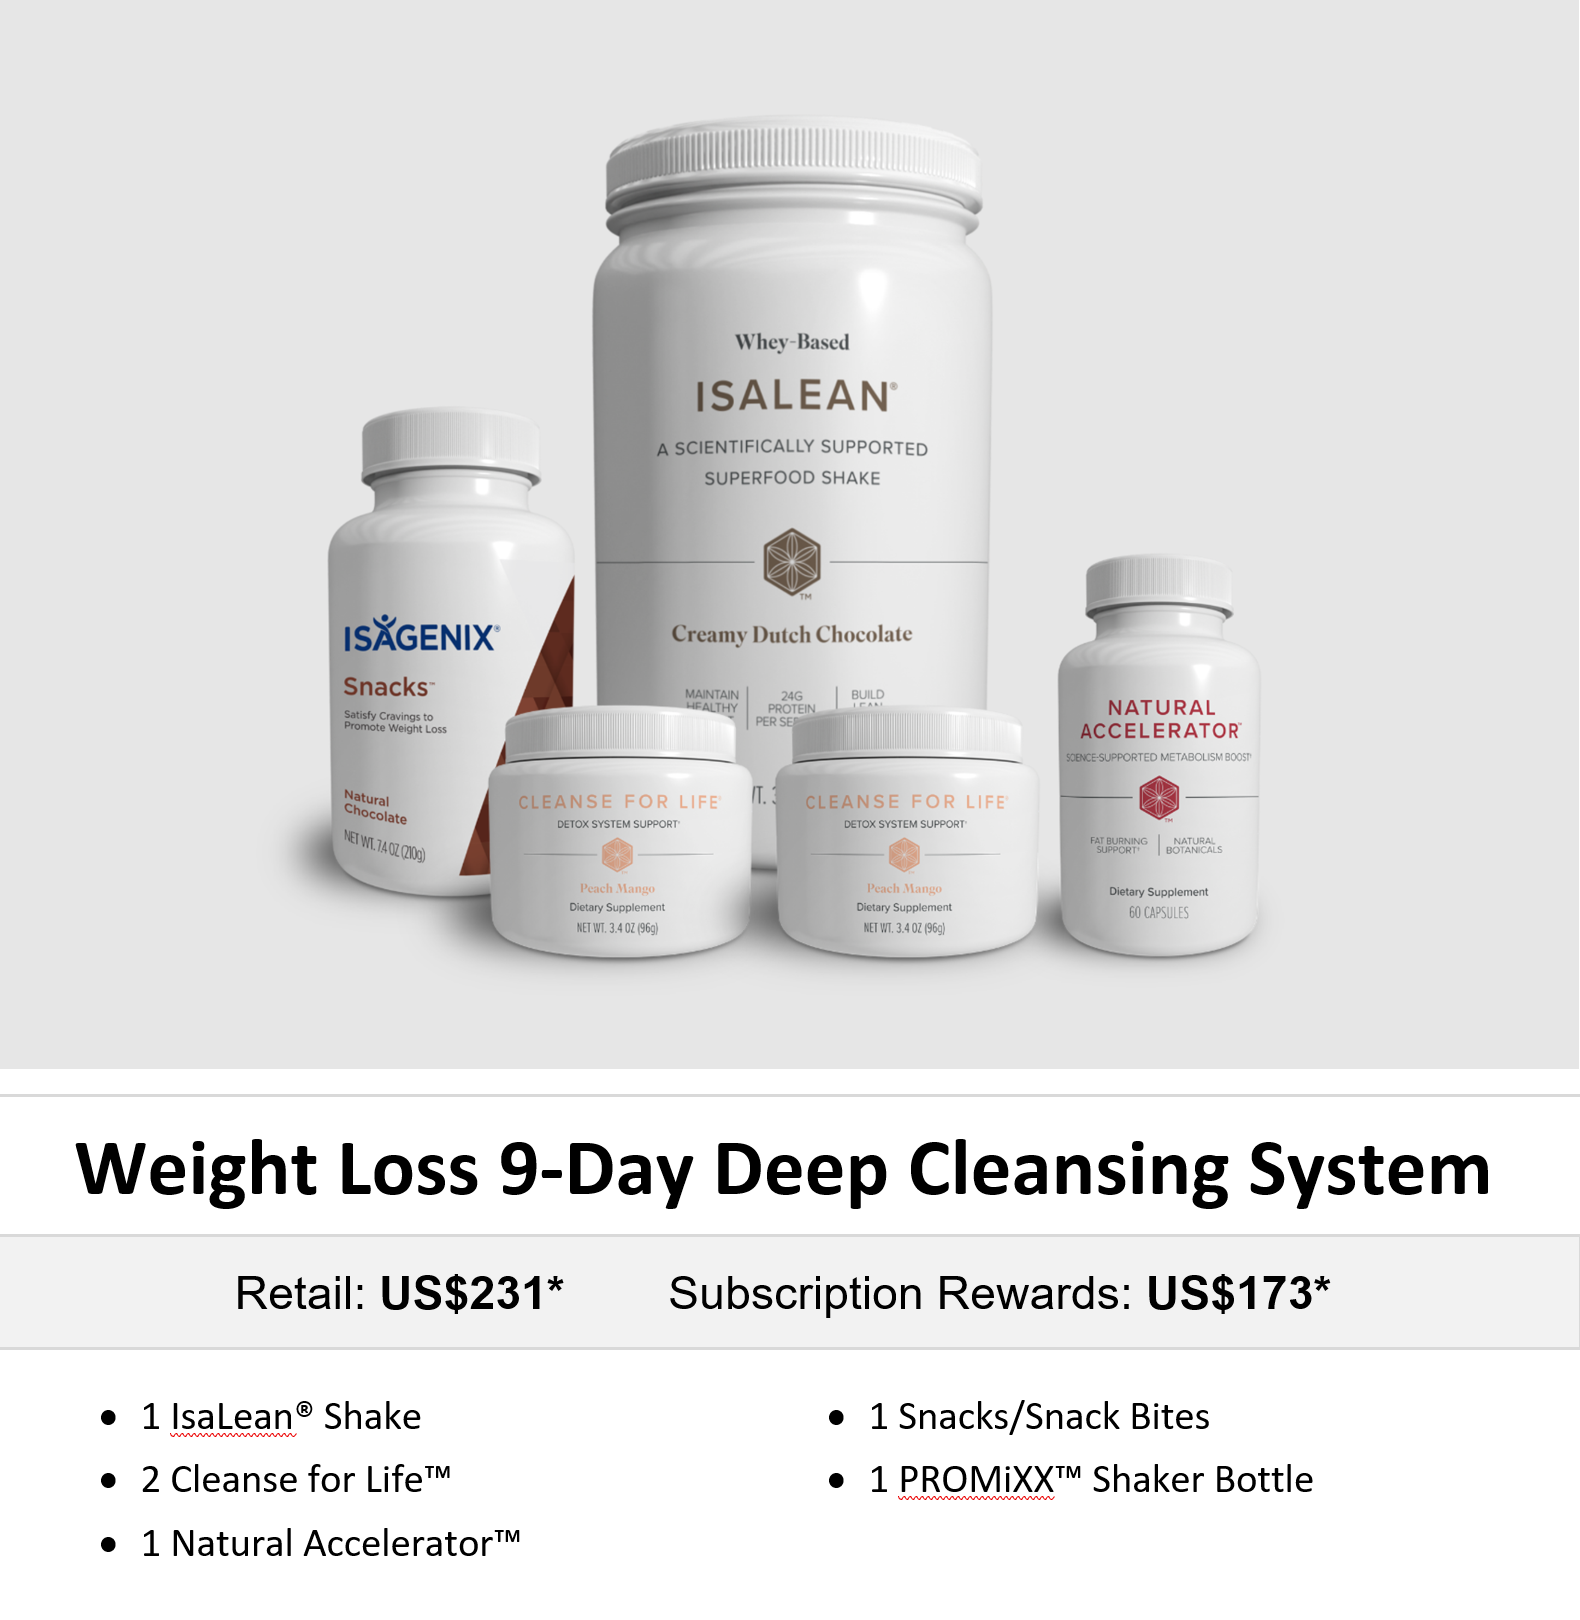 Weight Loss 9-Day Deep Cleansing System